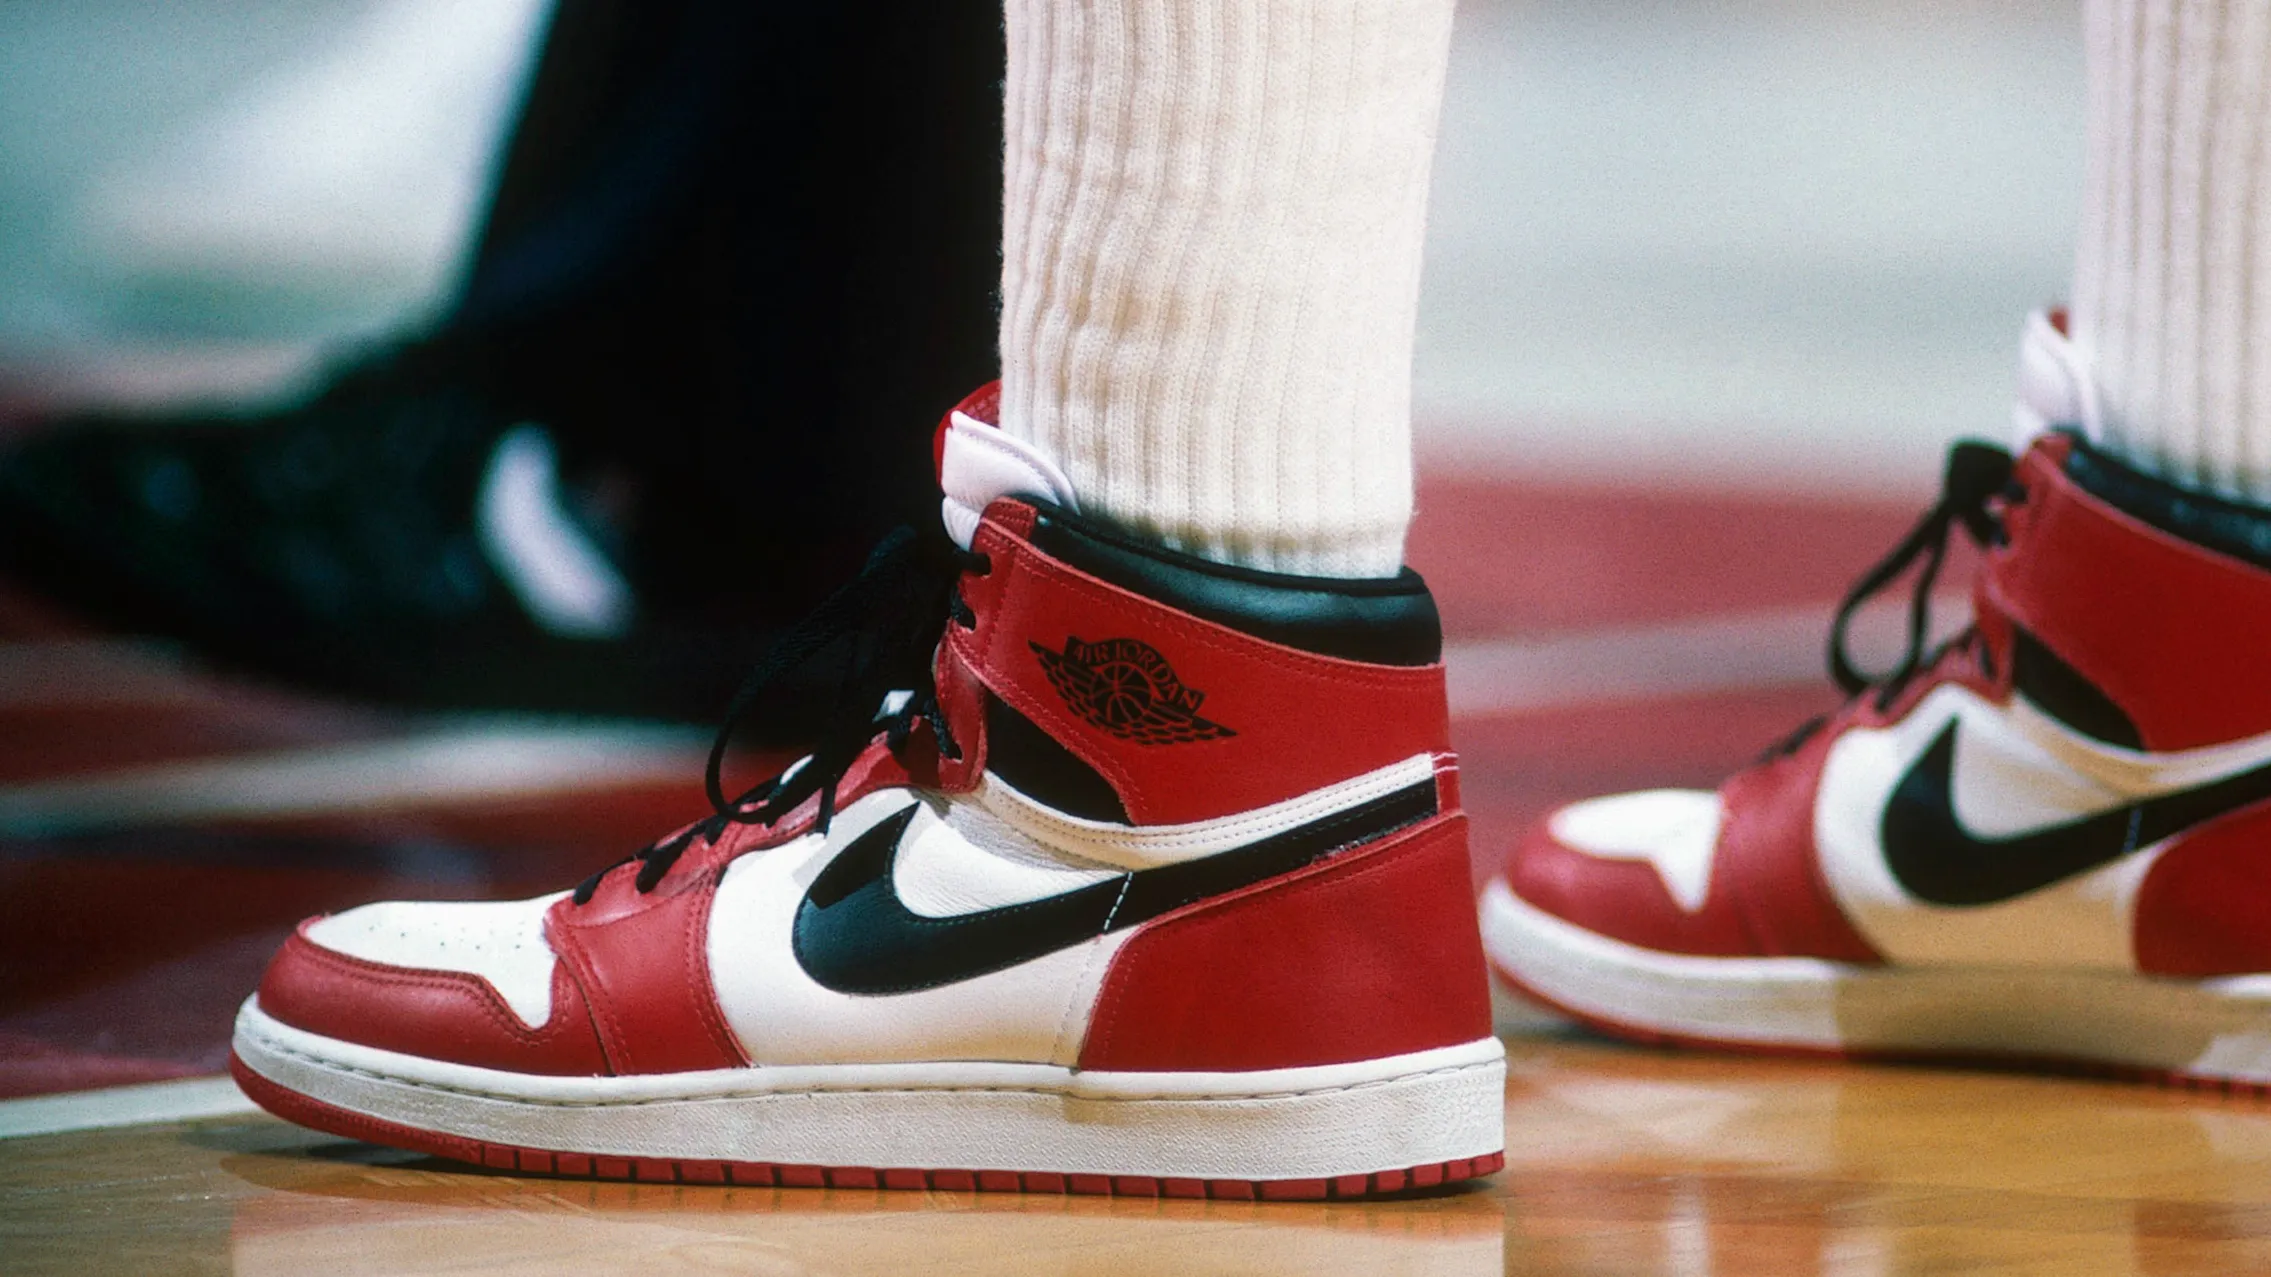 High-tech sports shoes: the iconic Jordan logo and more